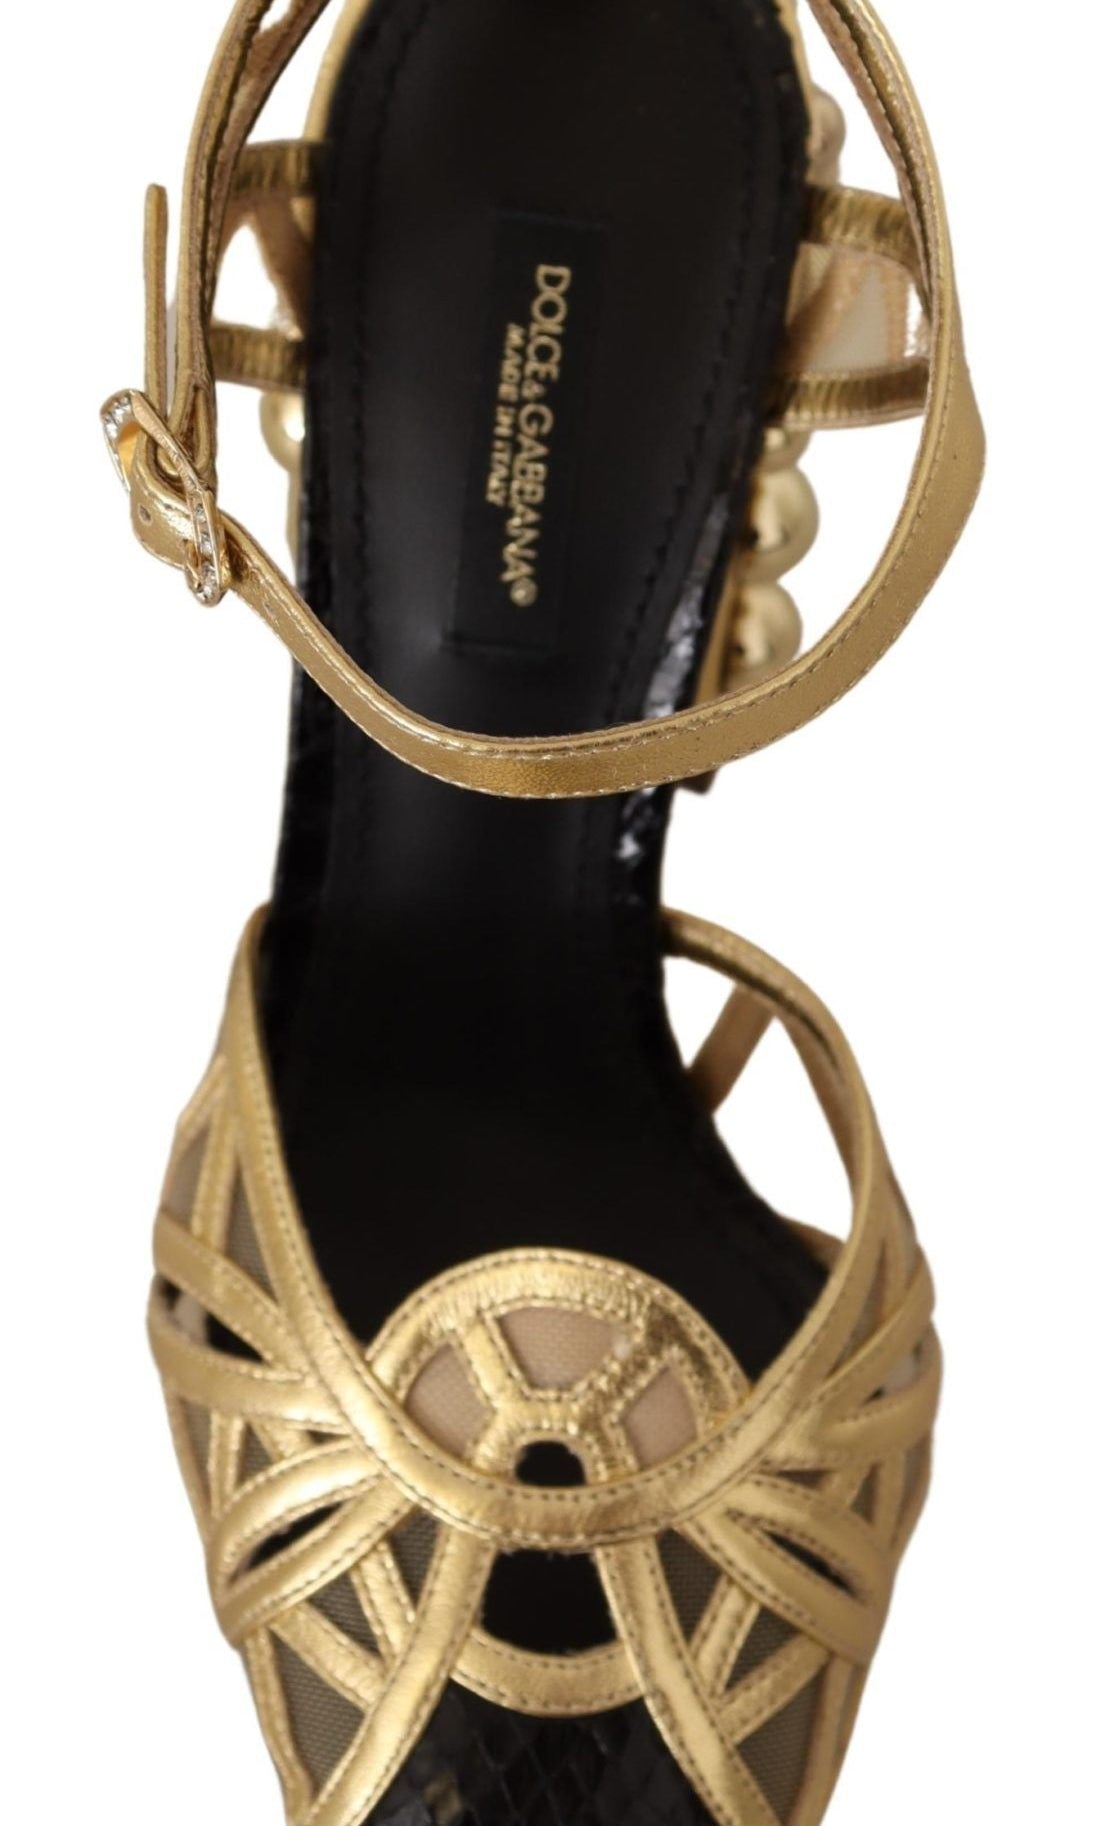 Dolce & Gabbana Black Gold Leather Studded Ankle Straps Shoes GENUINE AUTHENTIC BRAND LLC